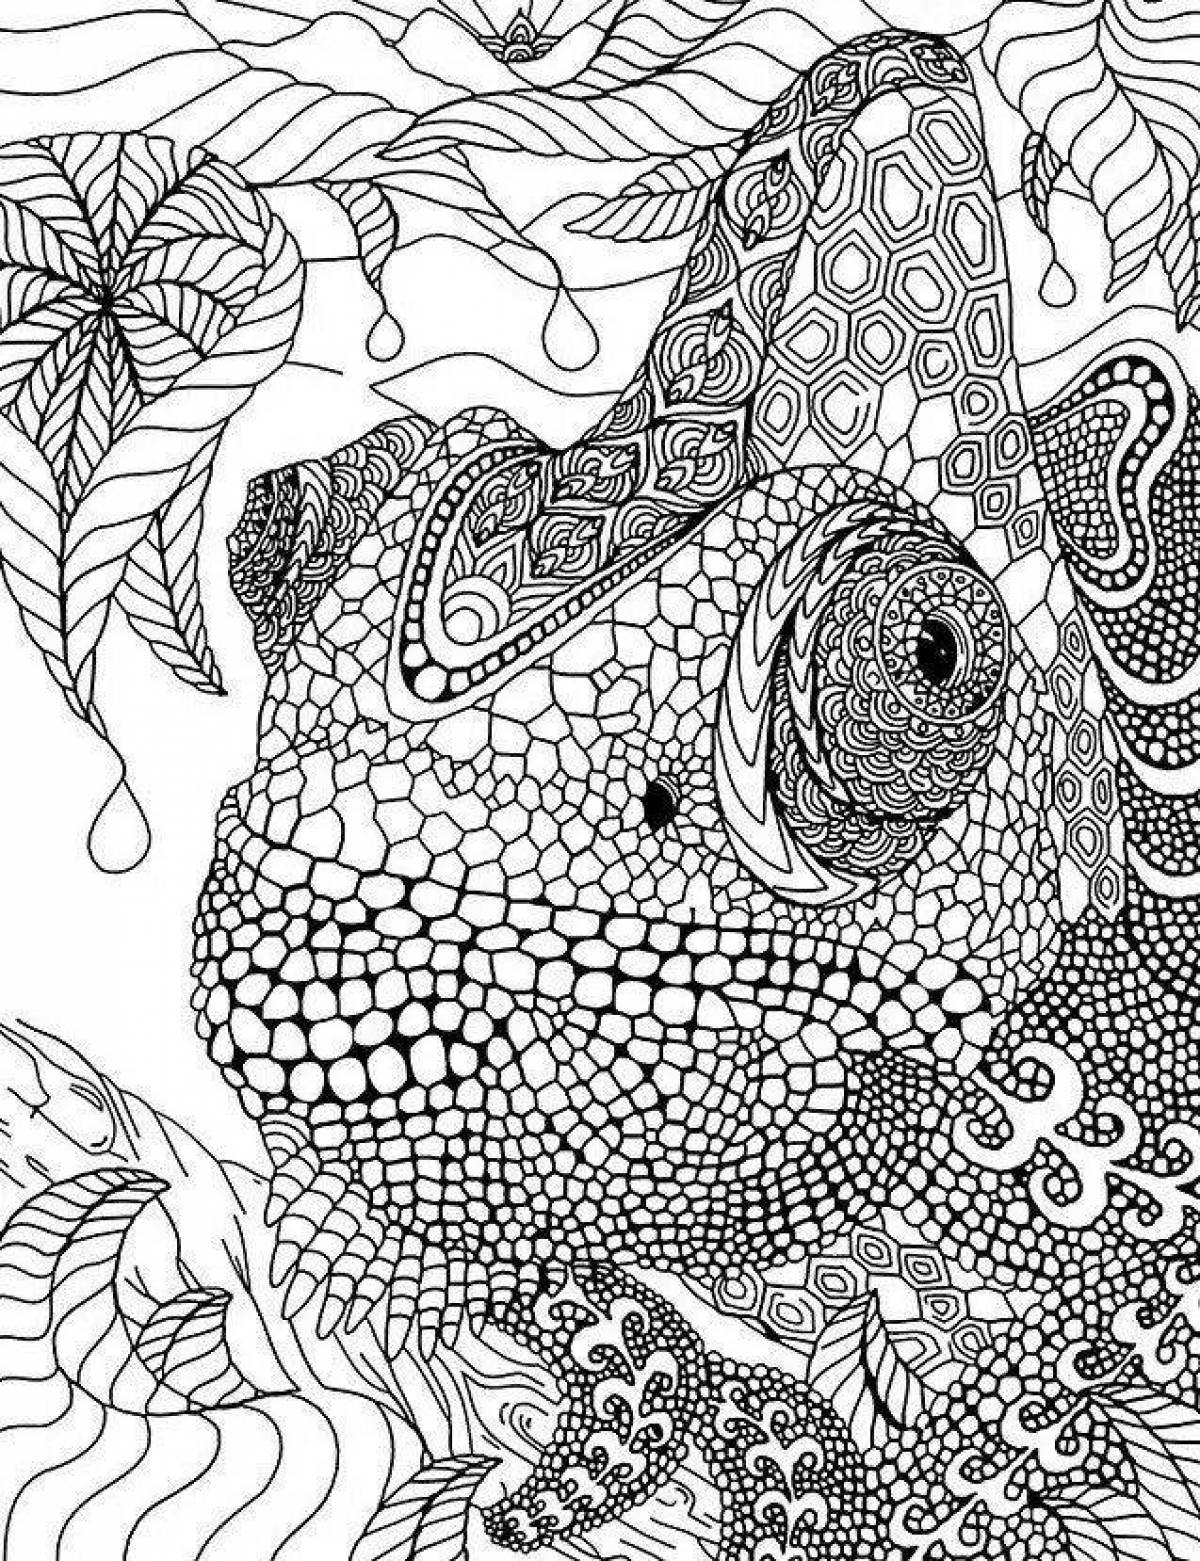 Amazing coloring book for adults ru complex